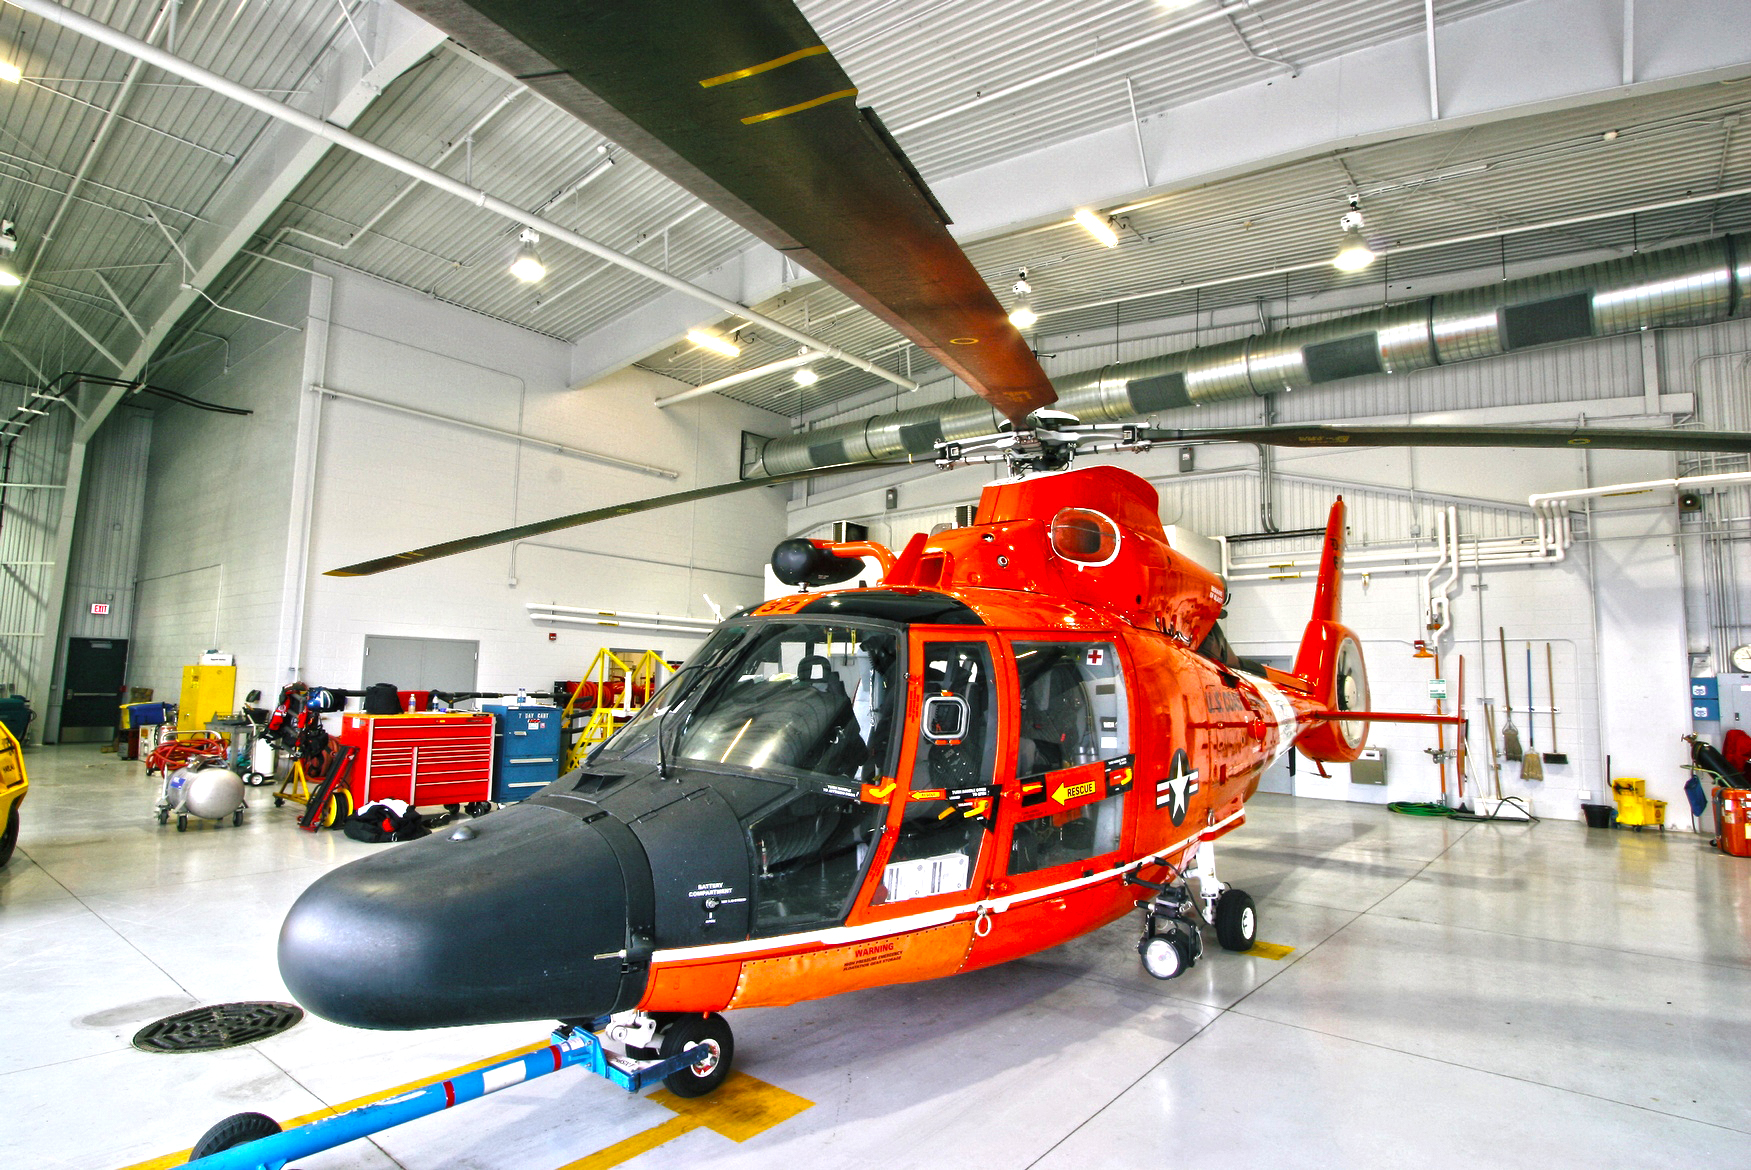 Interior of a hanger with a large red chopper in the foreground.